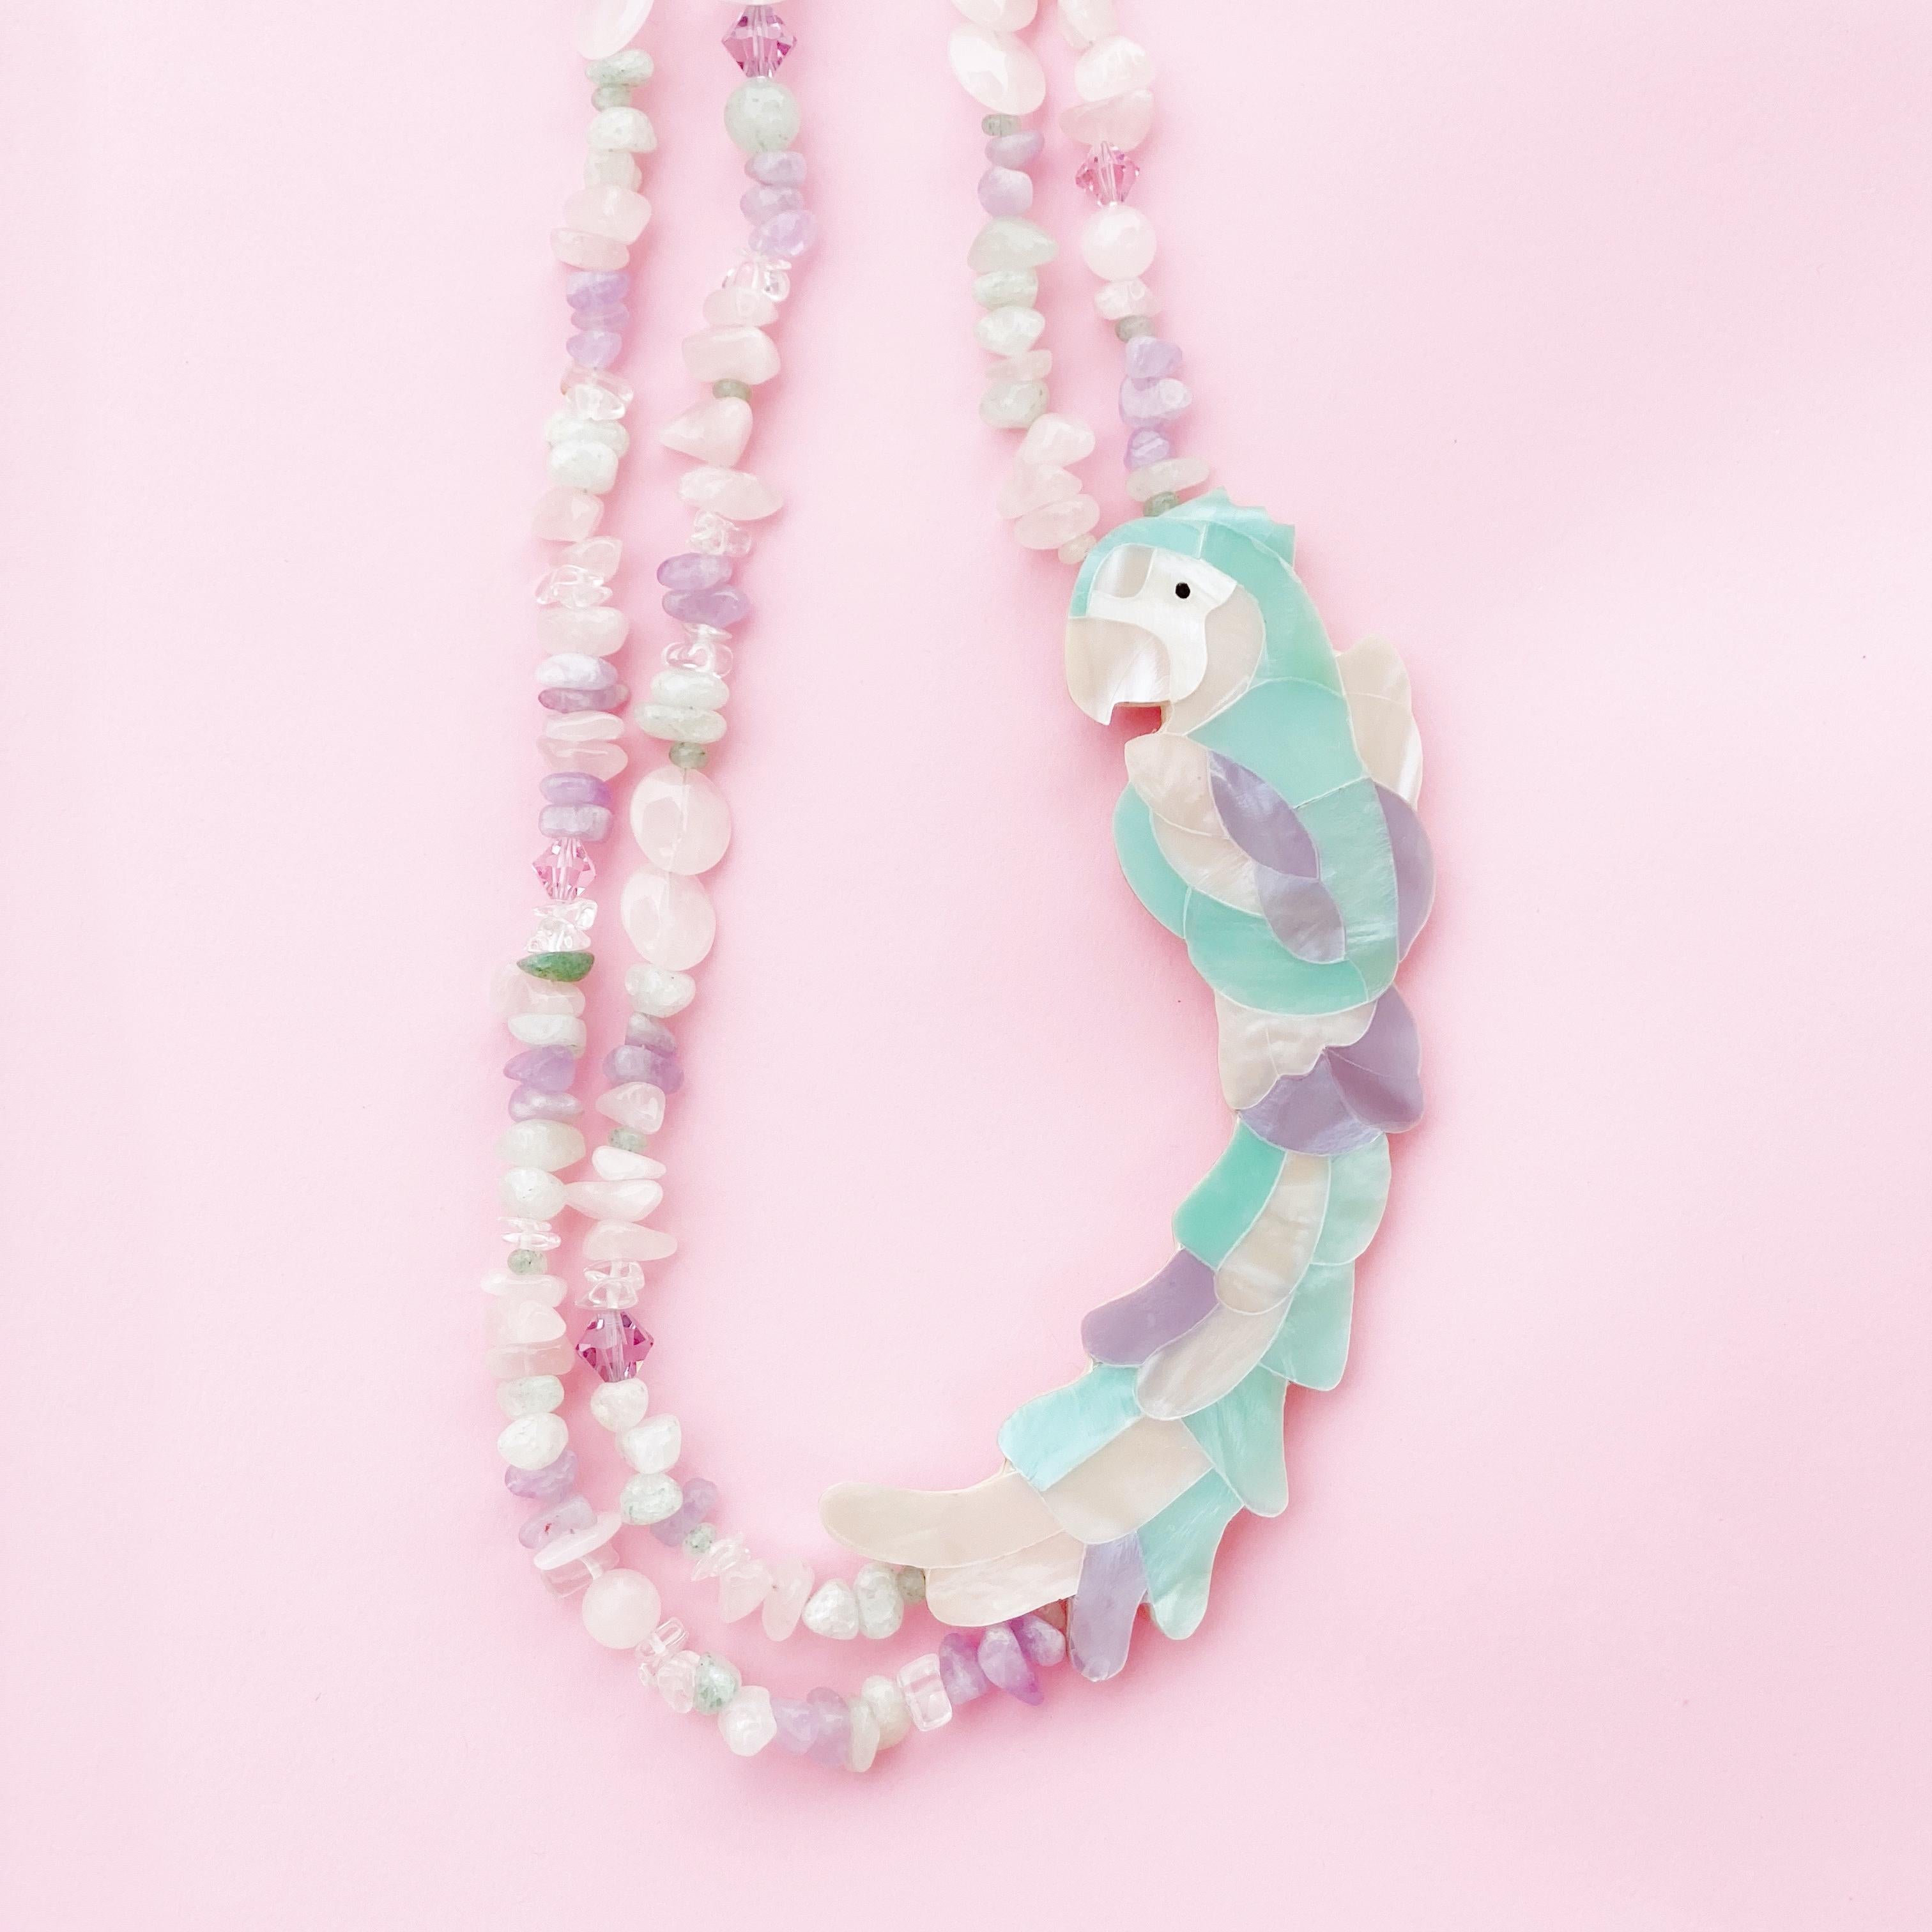 Pastel Mother of Pearl Parrot Necklace With Quartz Gemstones By Lee Sands, 1980s 1